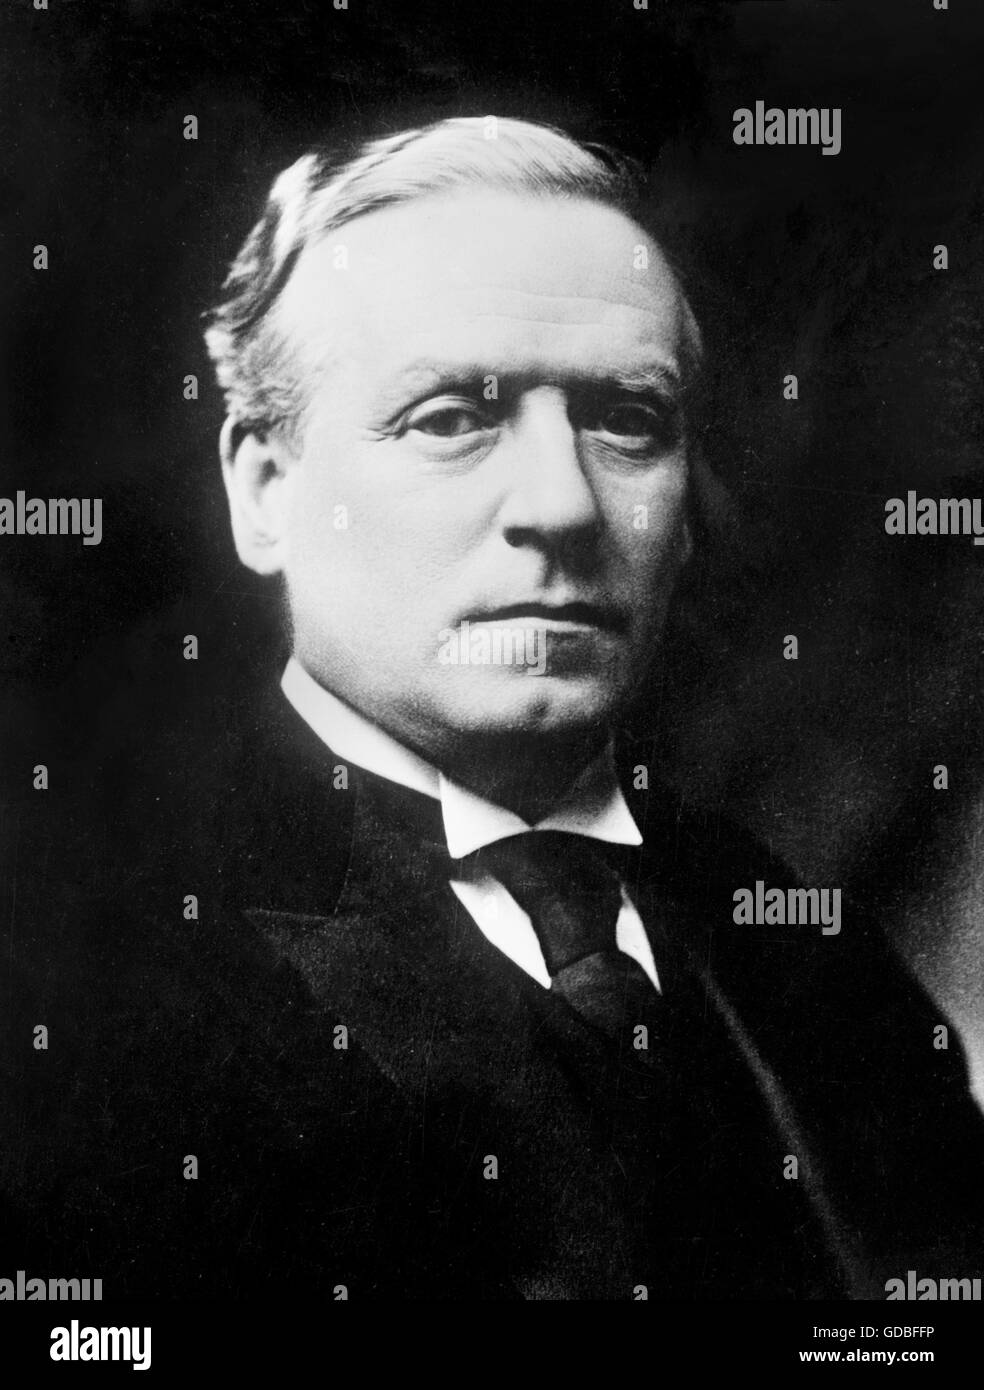 Herbert Asquith. Portrait of Liberal Prime Minister Herbert Henry Asquith, 1st Earl of Oxford and Asquith, (1852-1928),  from Bain News Service Stock Photo